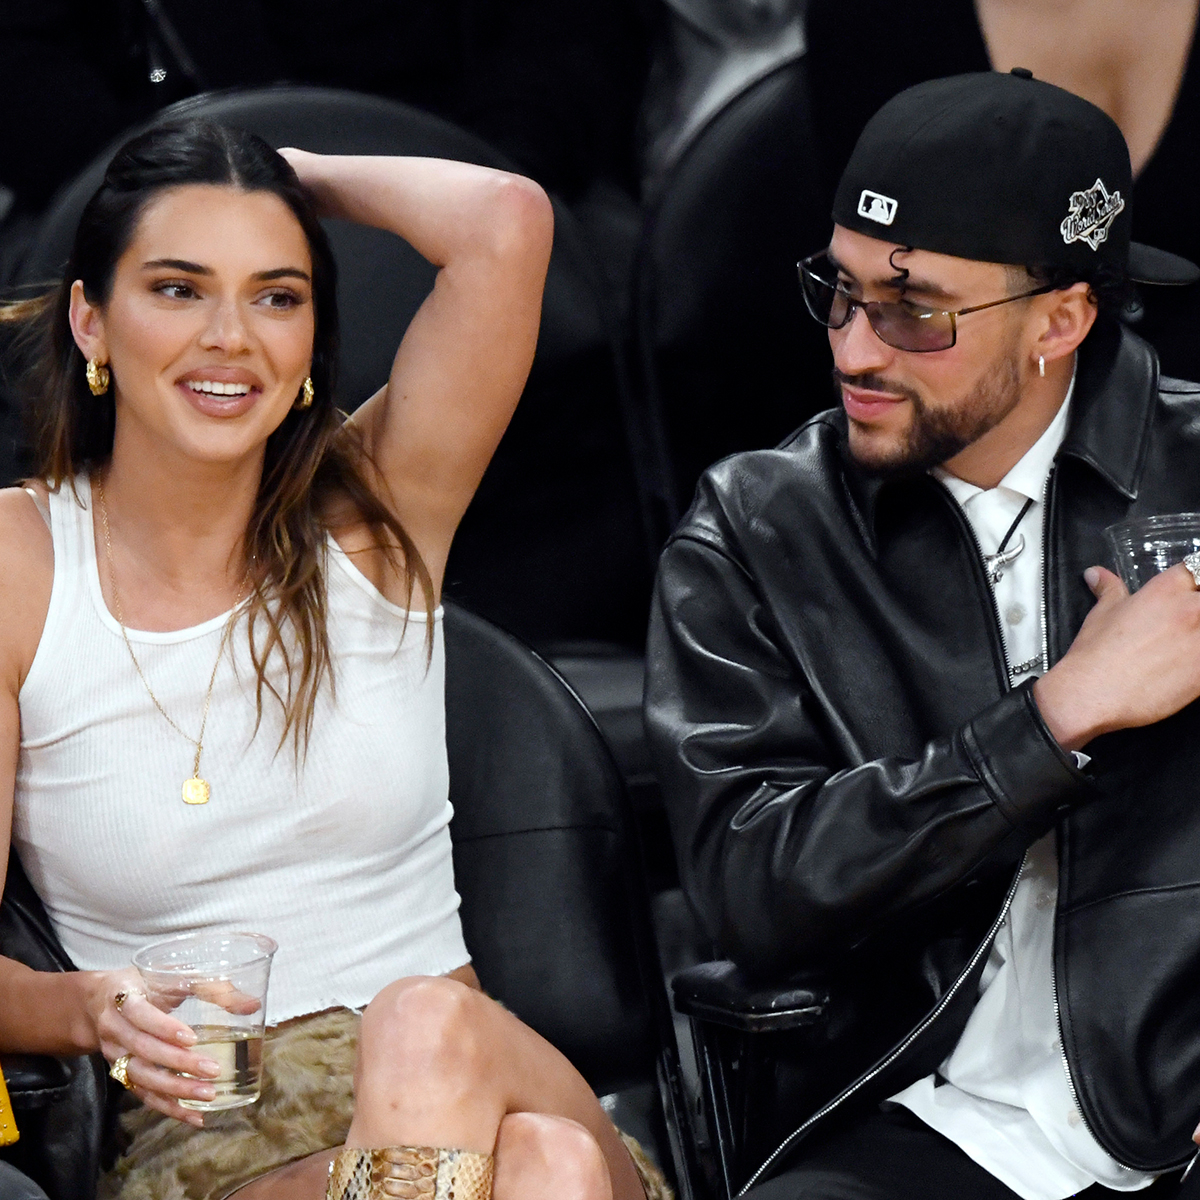 KENDALL JENNER AND BAD BUNNY MAKE THEIR LOVE STORY OFFICIAL IN THE